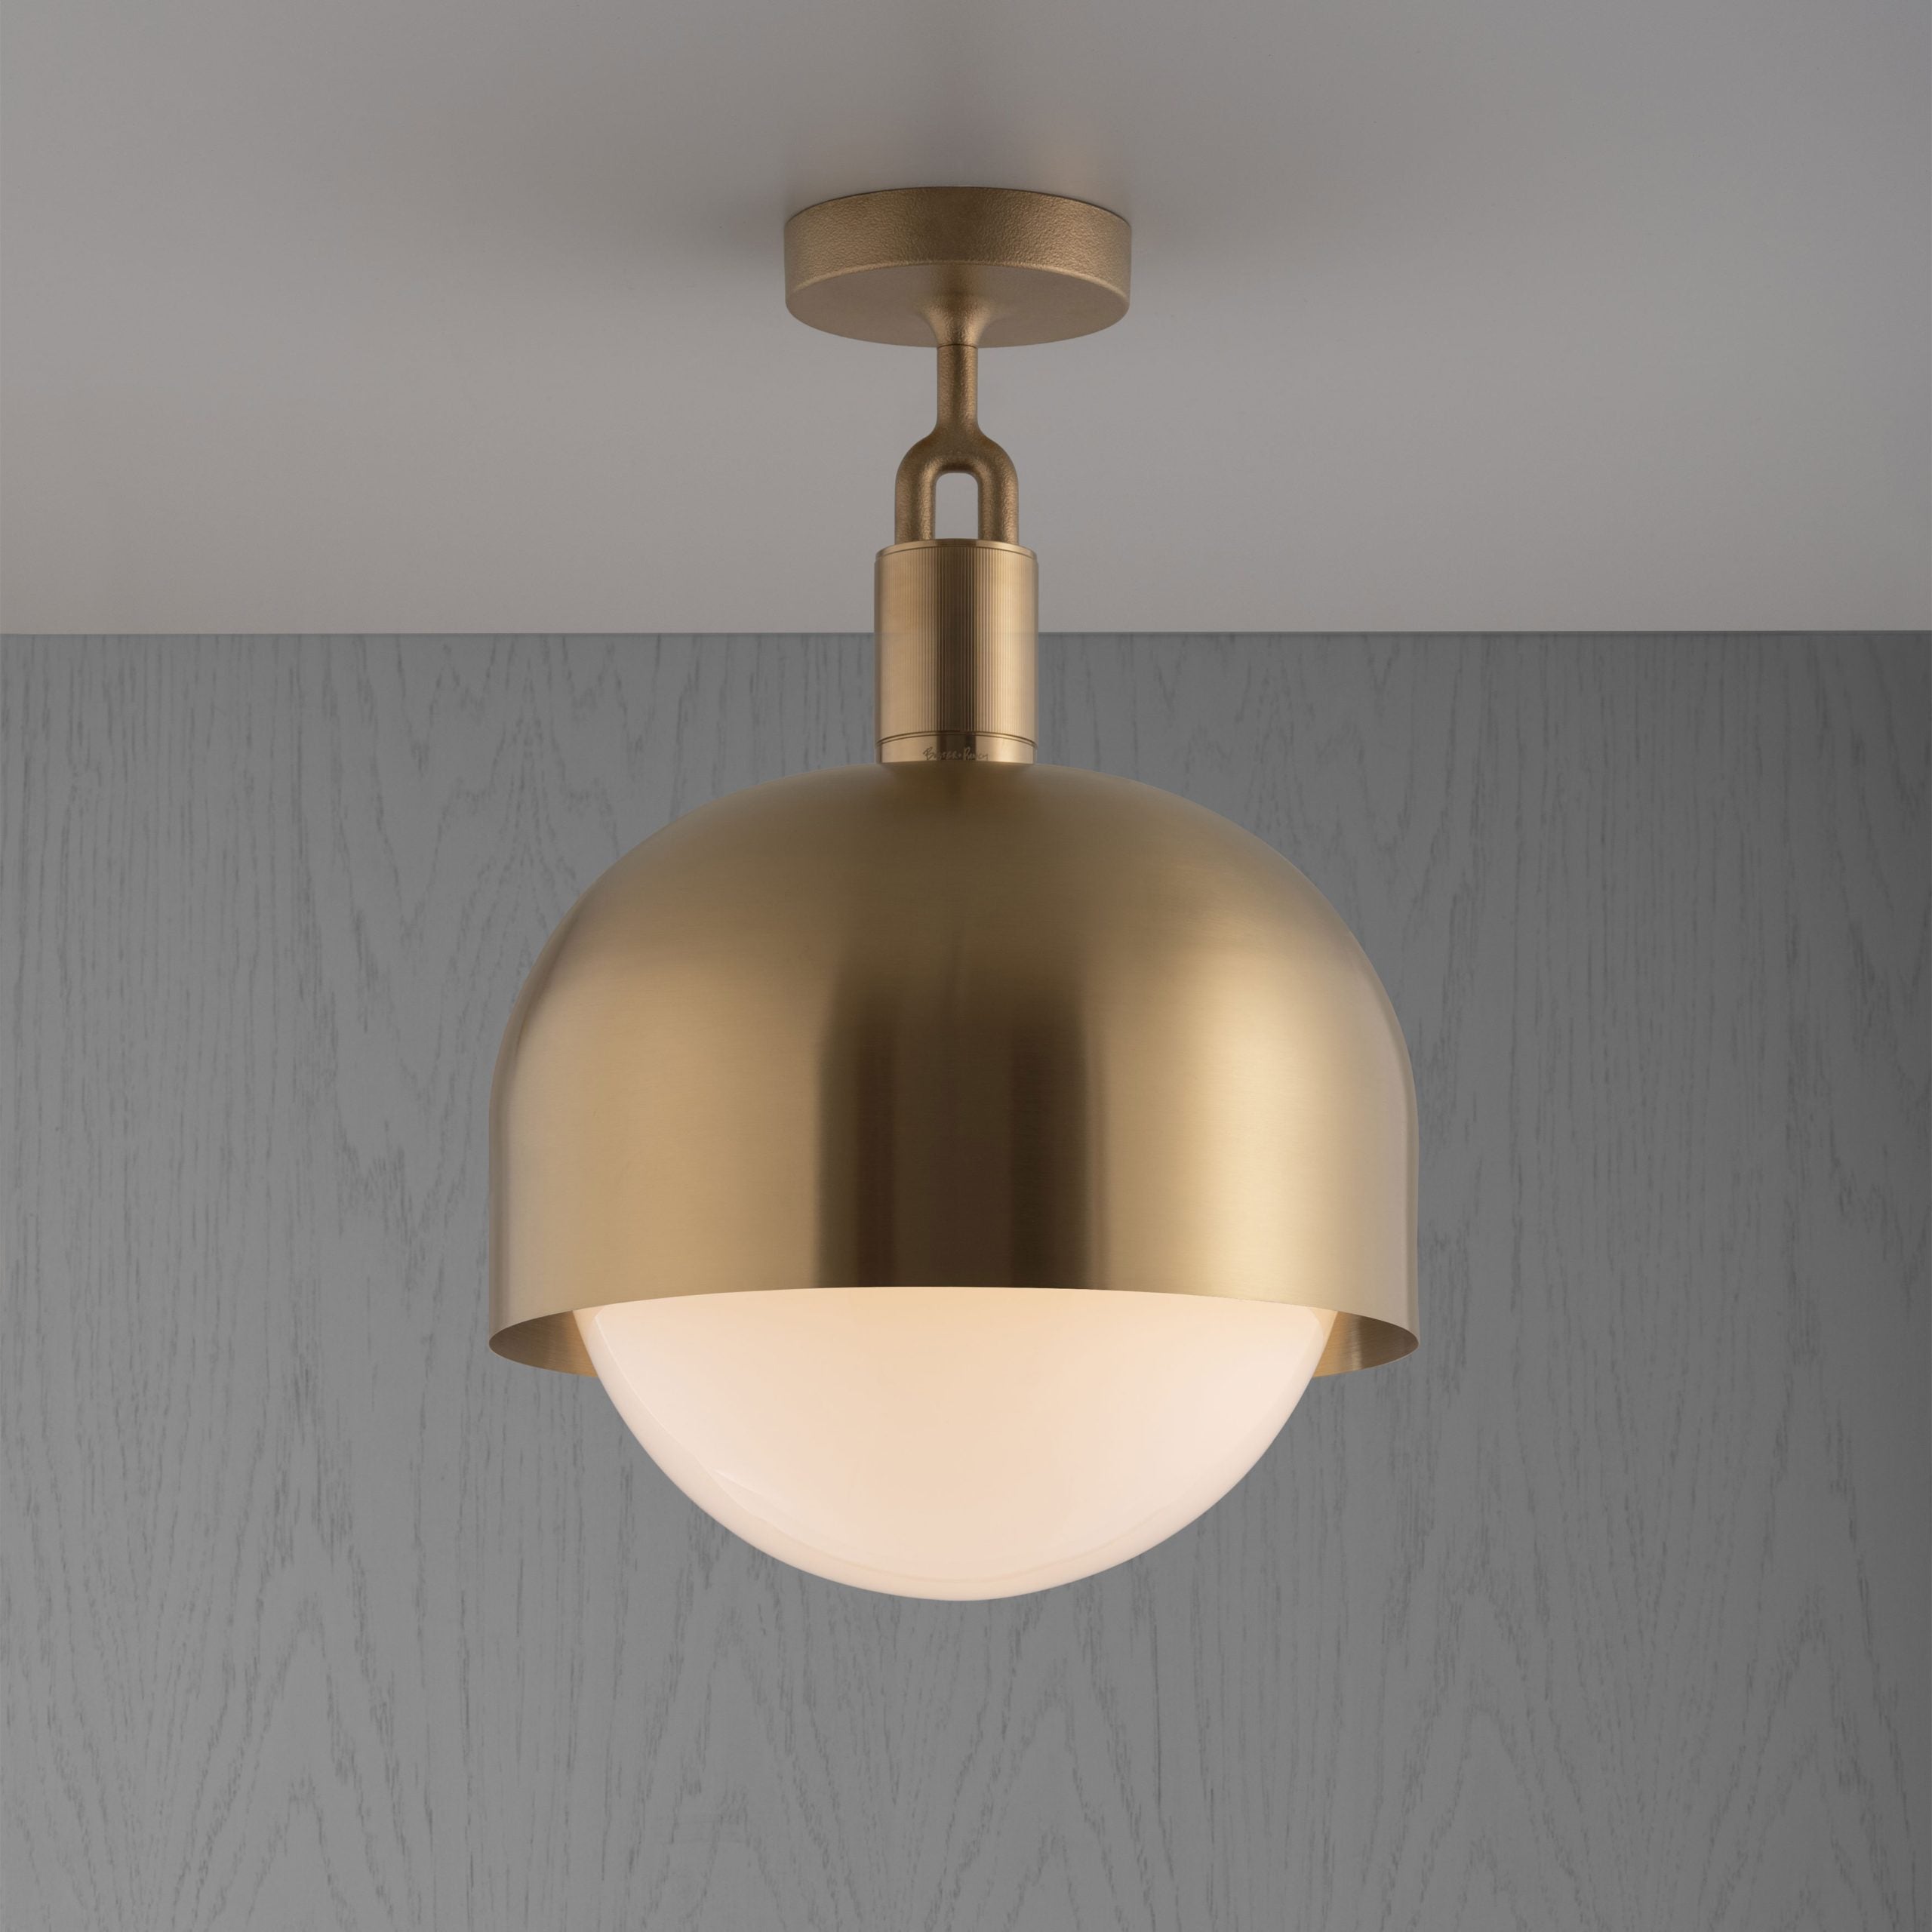 Buster and Punch Forked Ceiling Light large opal